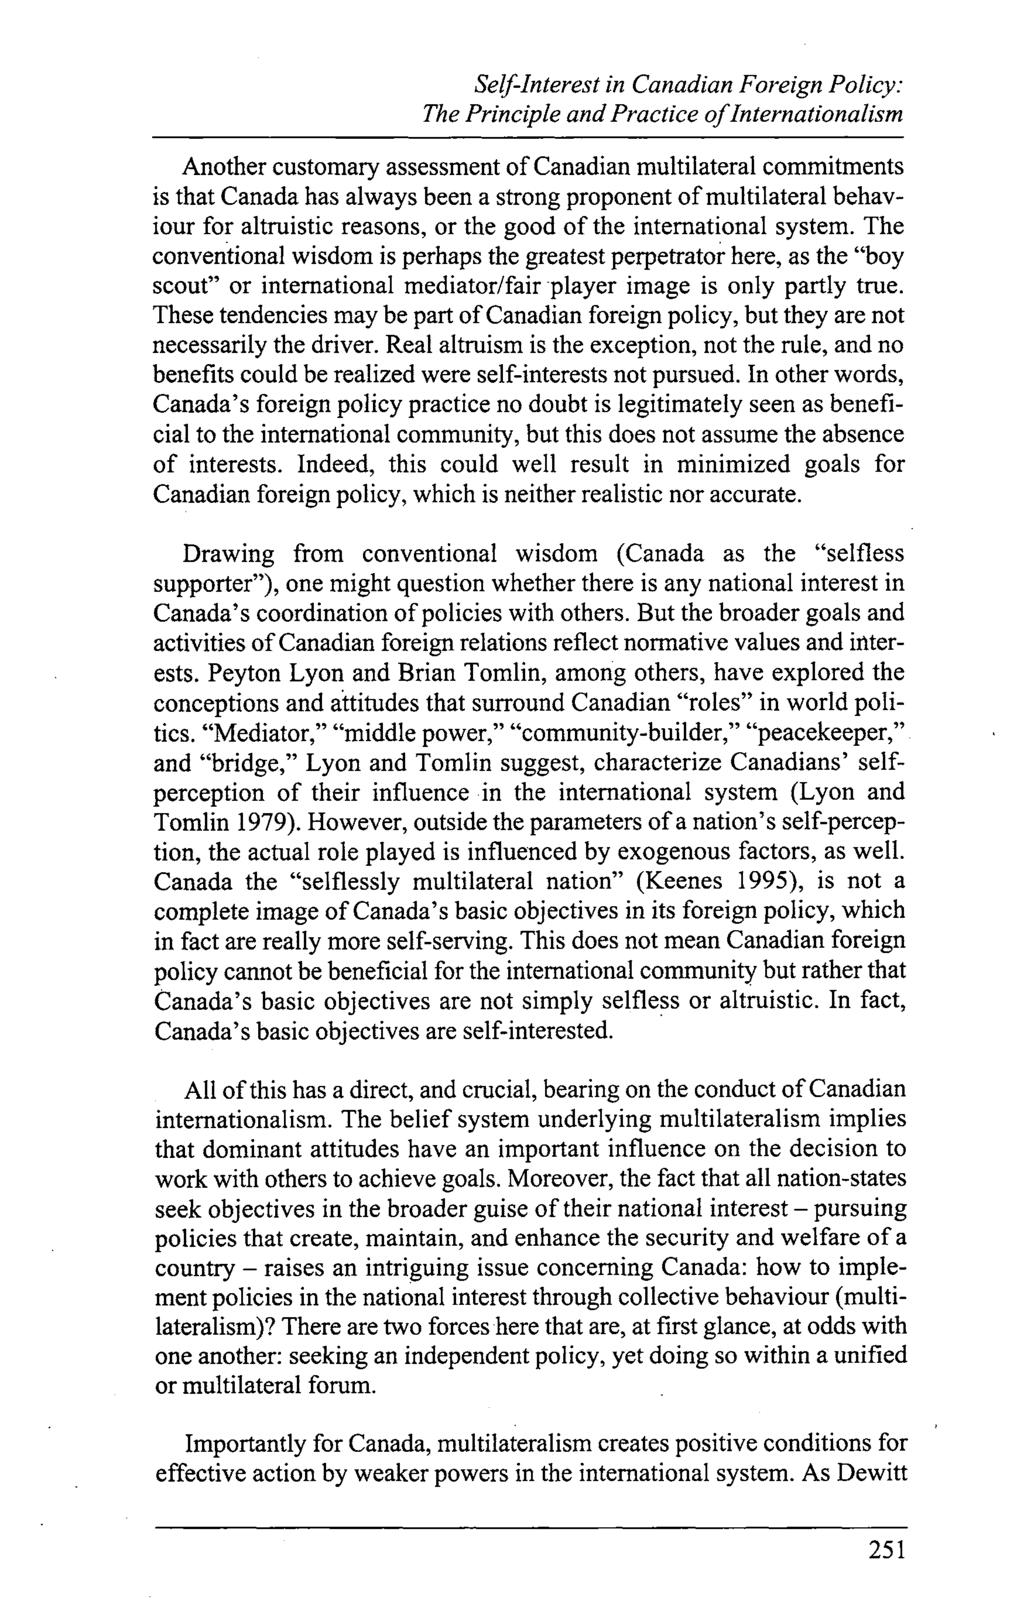 Self-Interest in Canadian Foreign Policy: The Principle and Practice of Internationalism Another customary assessment of Canadian multilateral commitments is that Canada has always been a strong